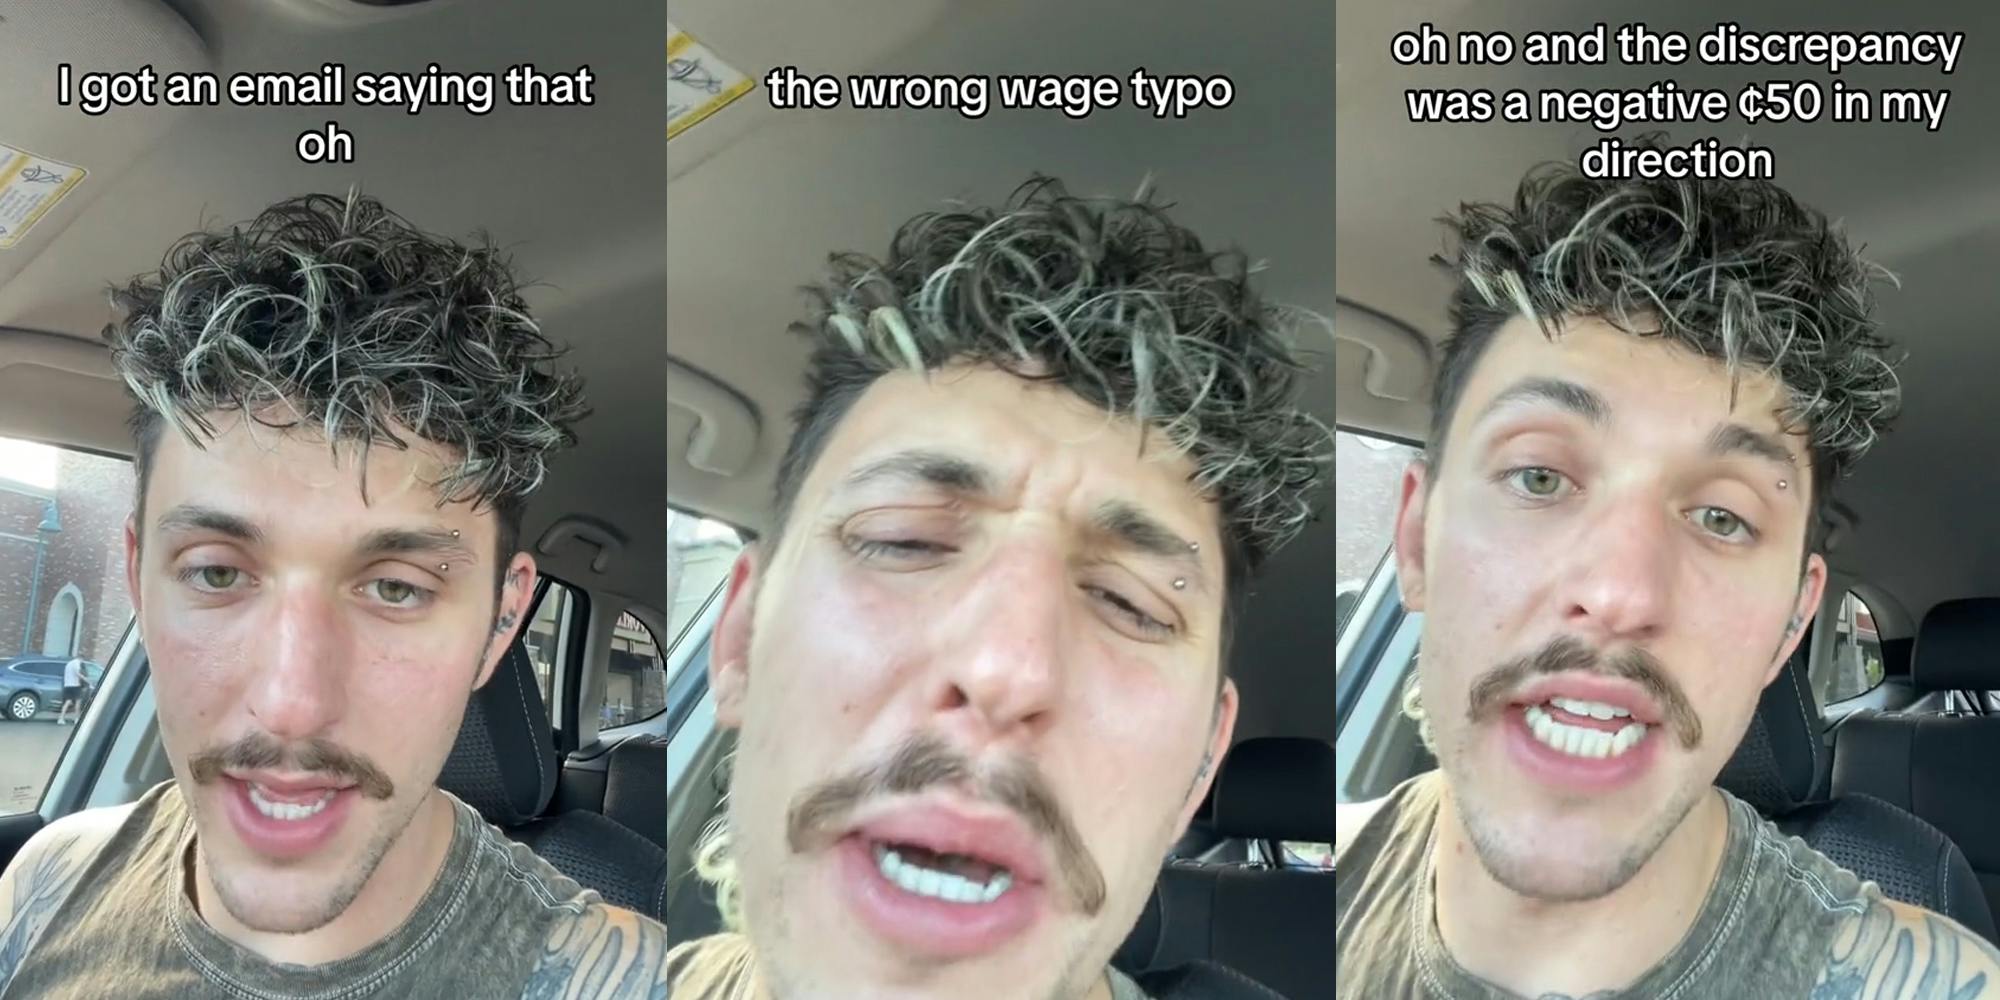 worker speaking in car with caption "I got an email saying oh" (l) worker speaking in car with caption "the wrong wage typo" (c) worker speaking in car with caption "oh no and the discrepancy was a negative 50 cents in my direction" (r)